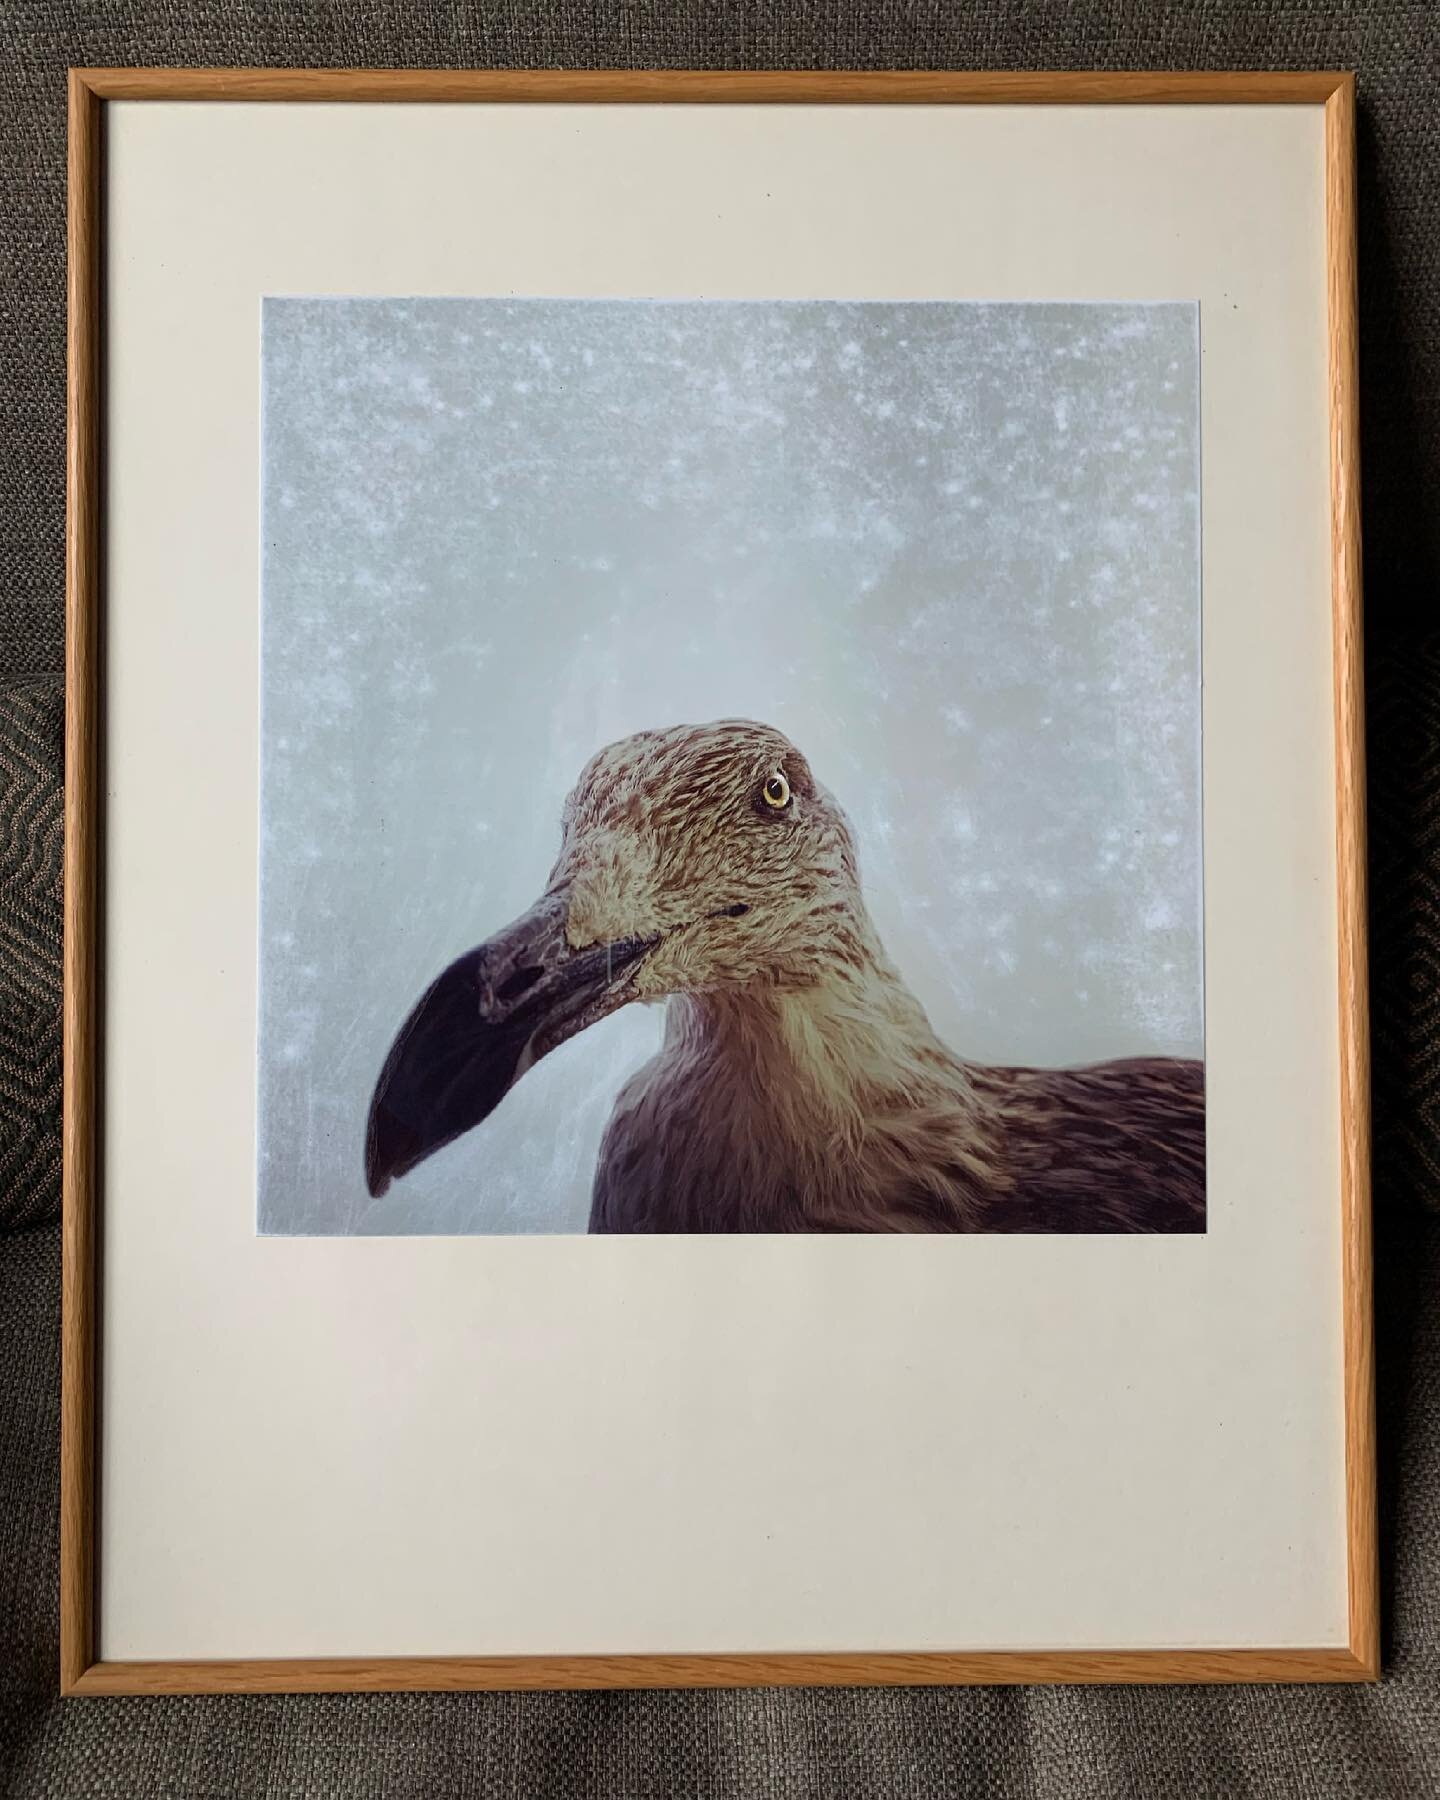 Mixed media, framed
For sale, dm me if you&rsquo;re interested.
41x51cm

#taxidermyart #mixedmedia #mixedmediaart #seagull #meeuw #wallart #winderkammer photograph